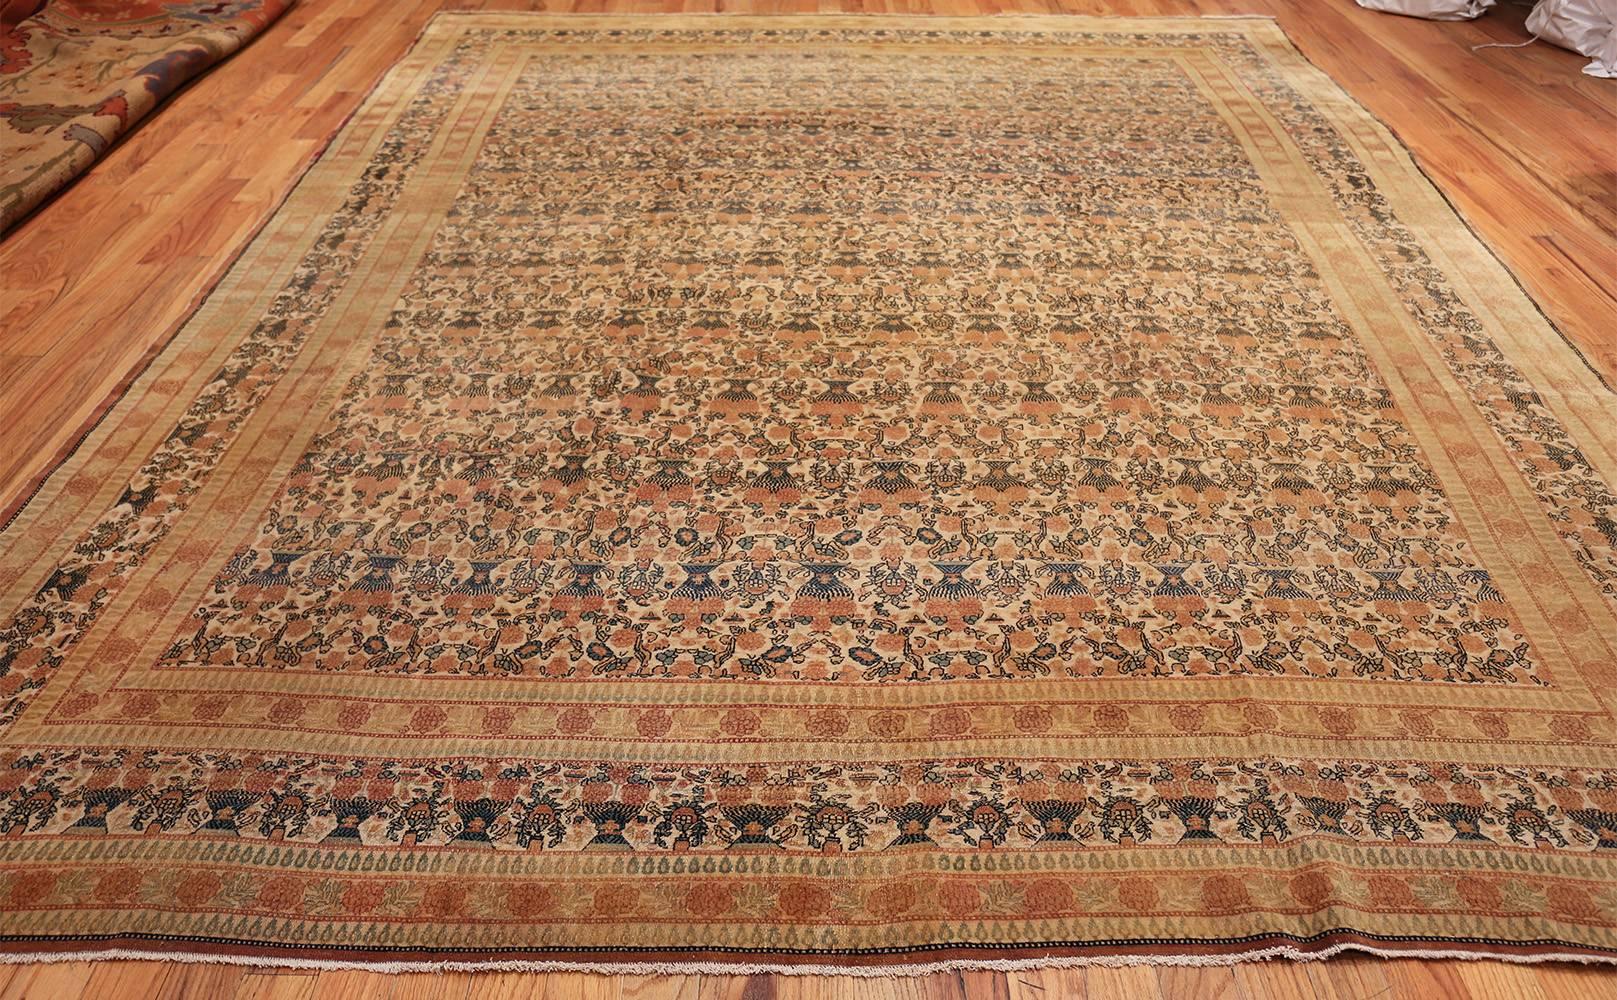 Wool Fine Persian Tehran Room Size Antique Carpet. Size: 9 ft 6 in x 12 ft 6 in